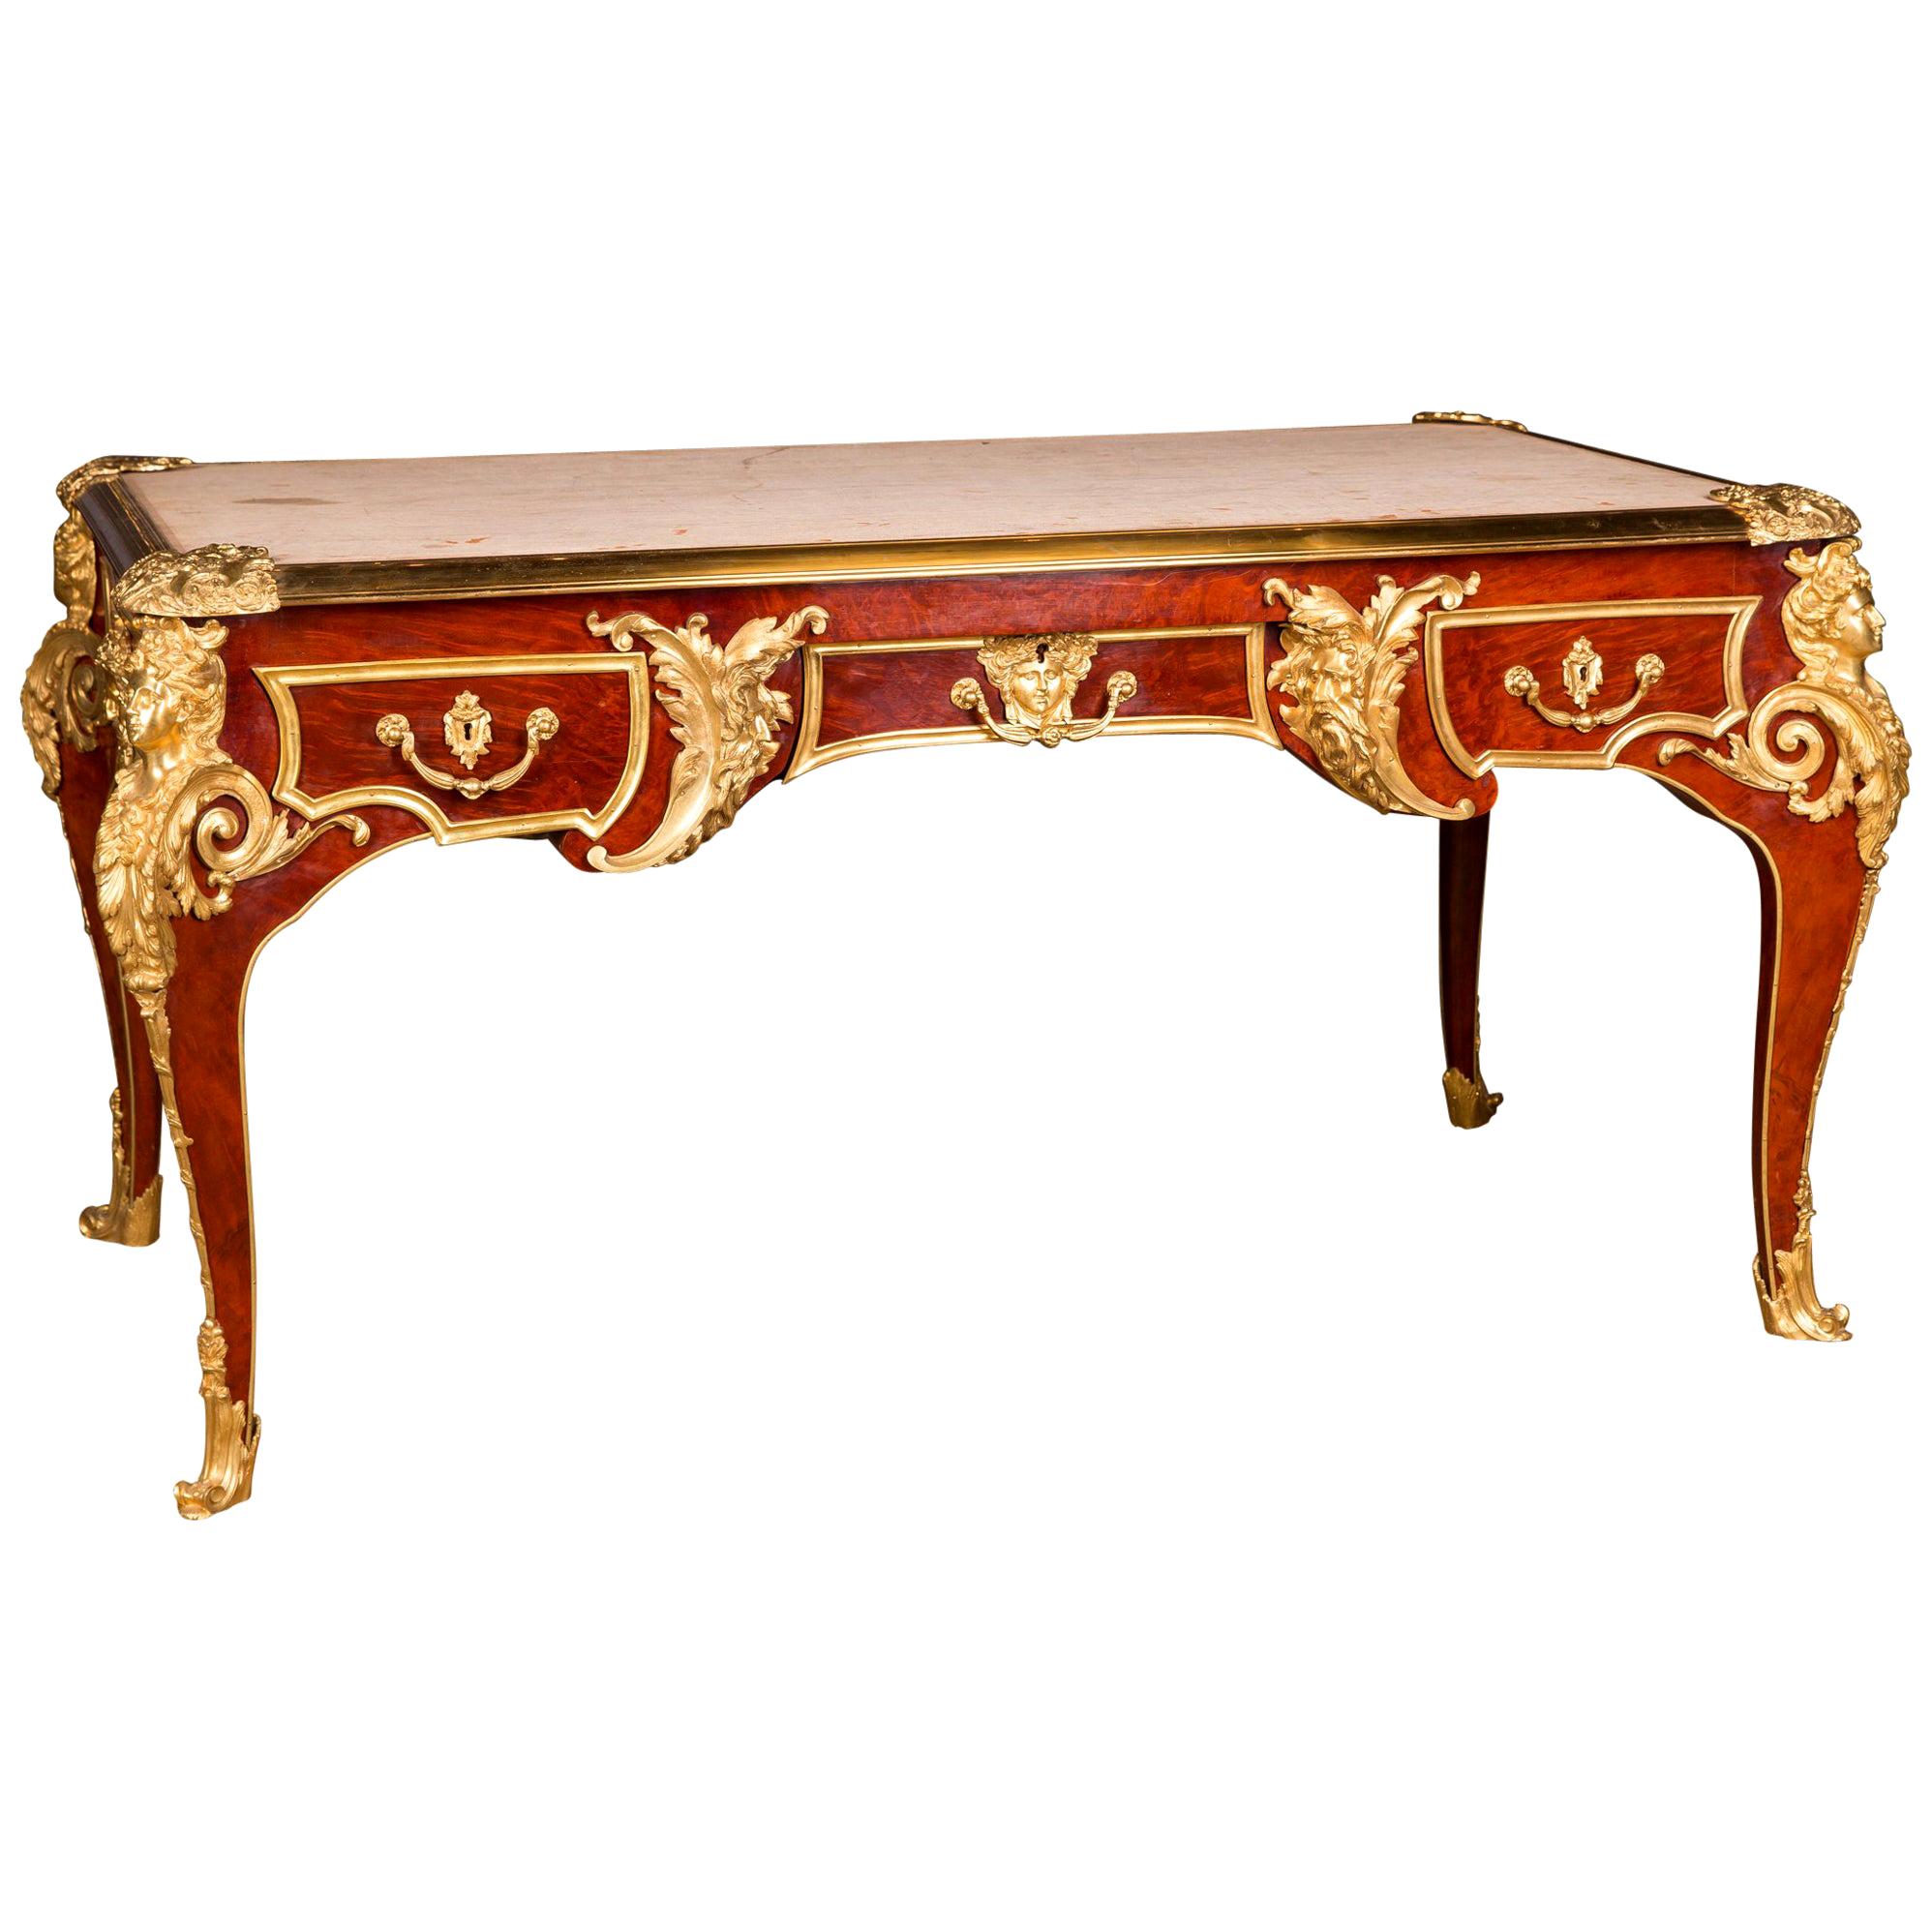 Majestic French Bureau Plat Desk According to Andre C. Boulle For Sale